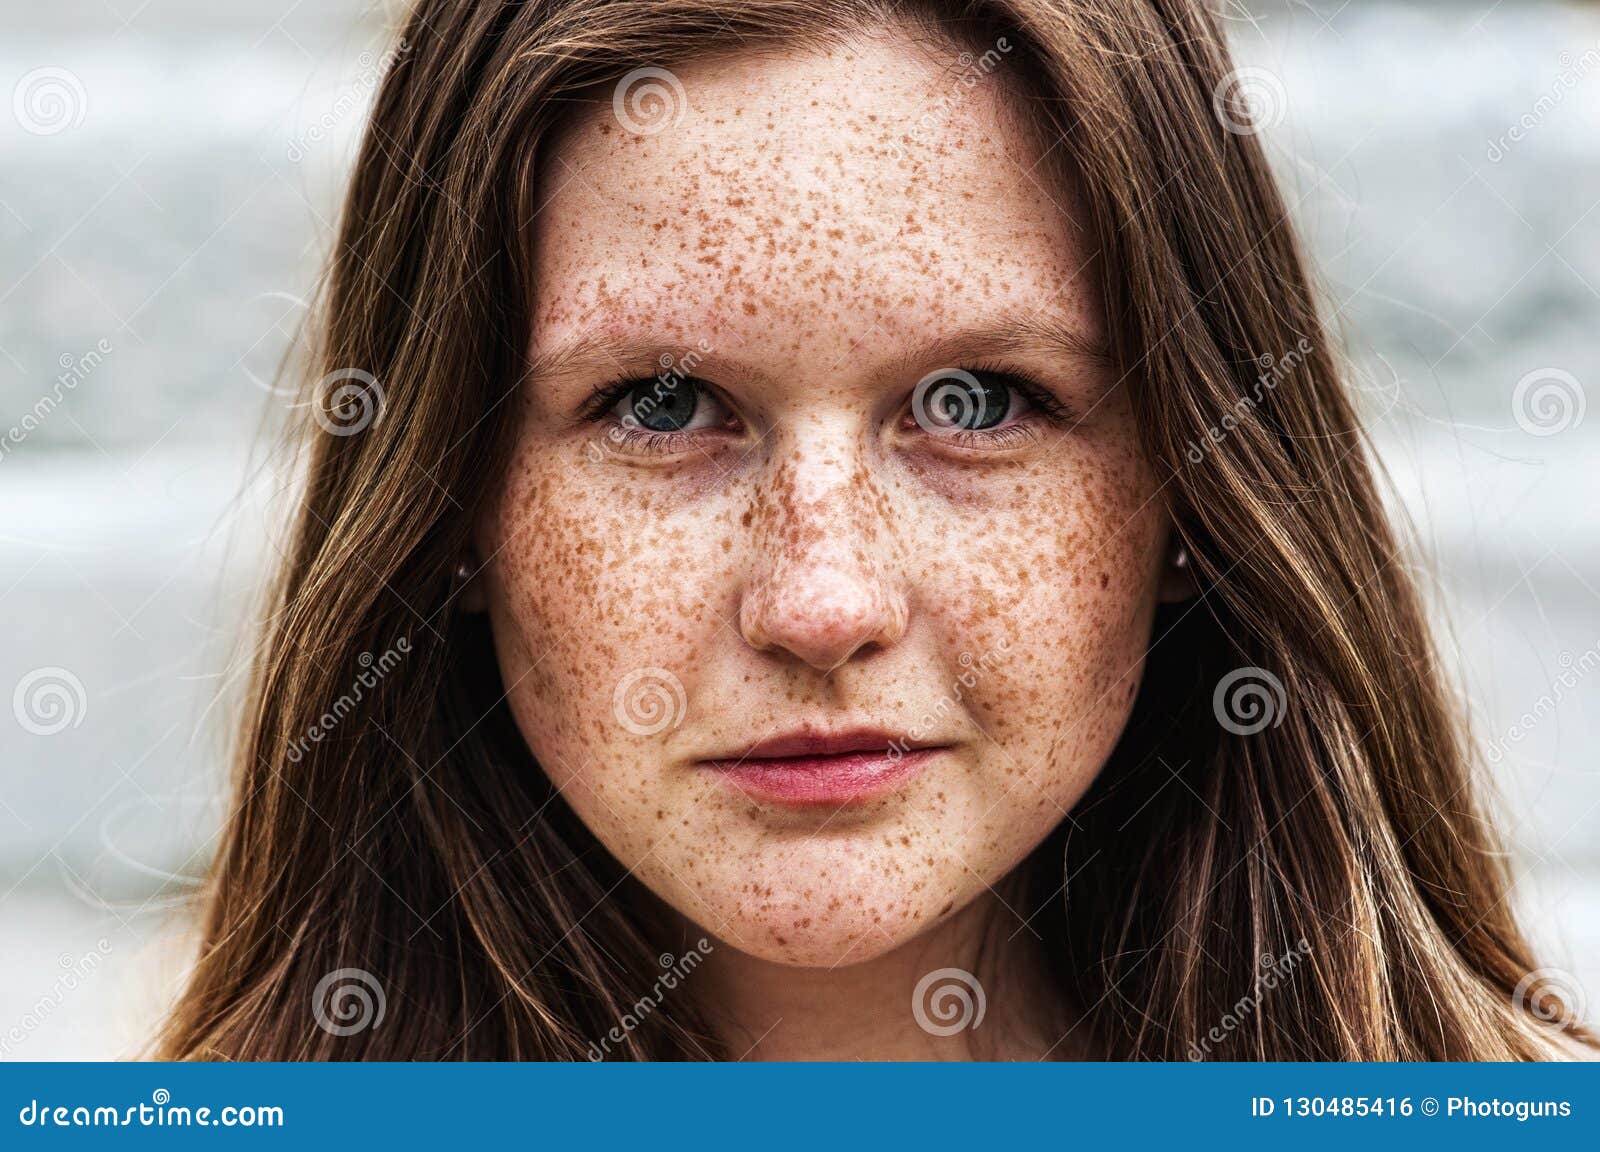 portrait of a beautiful redhead girl with freckles